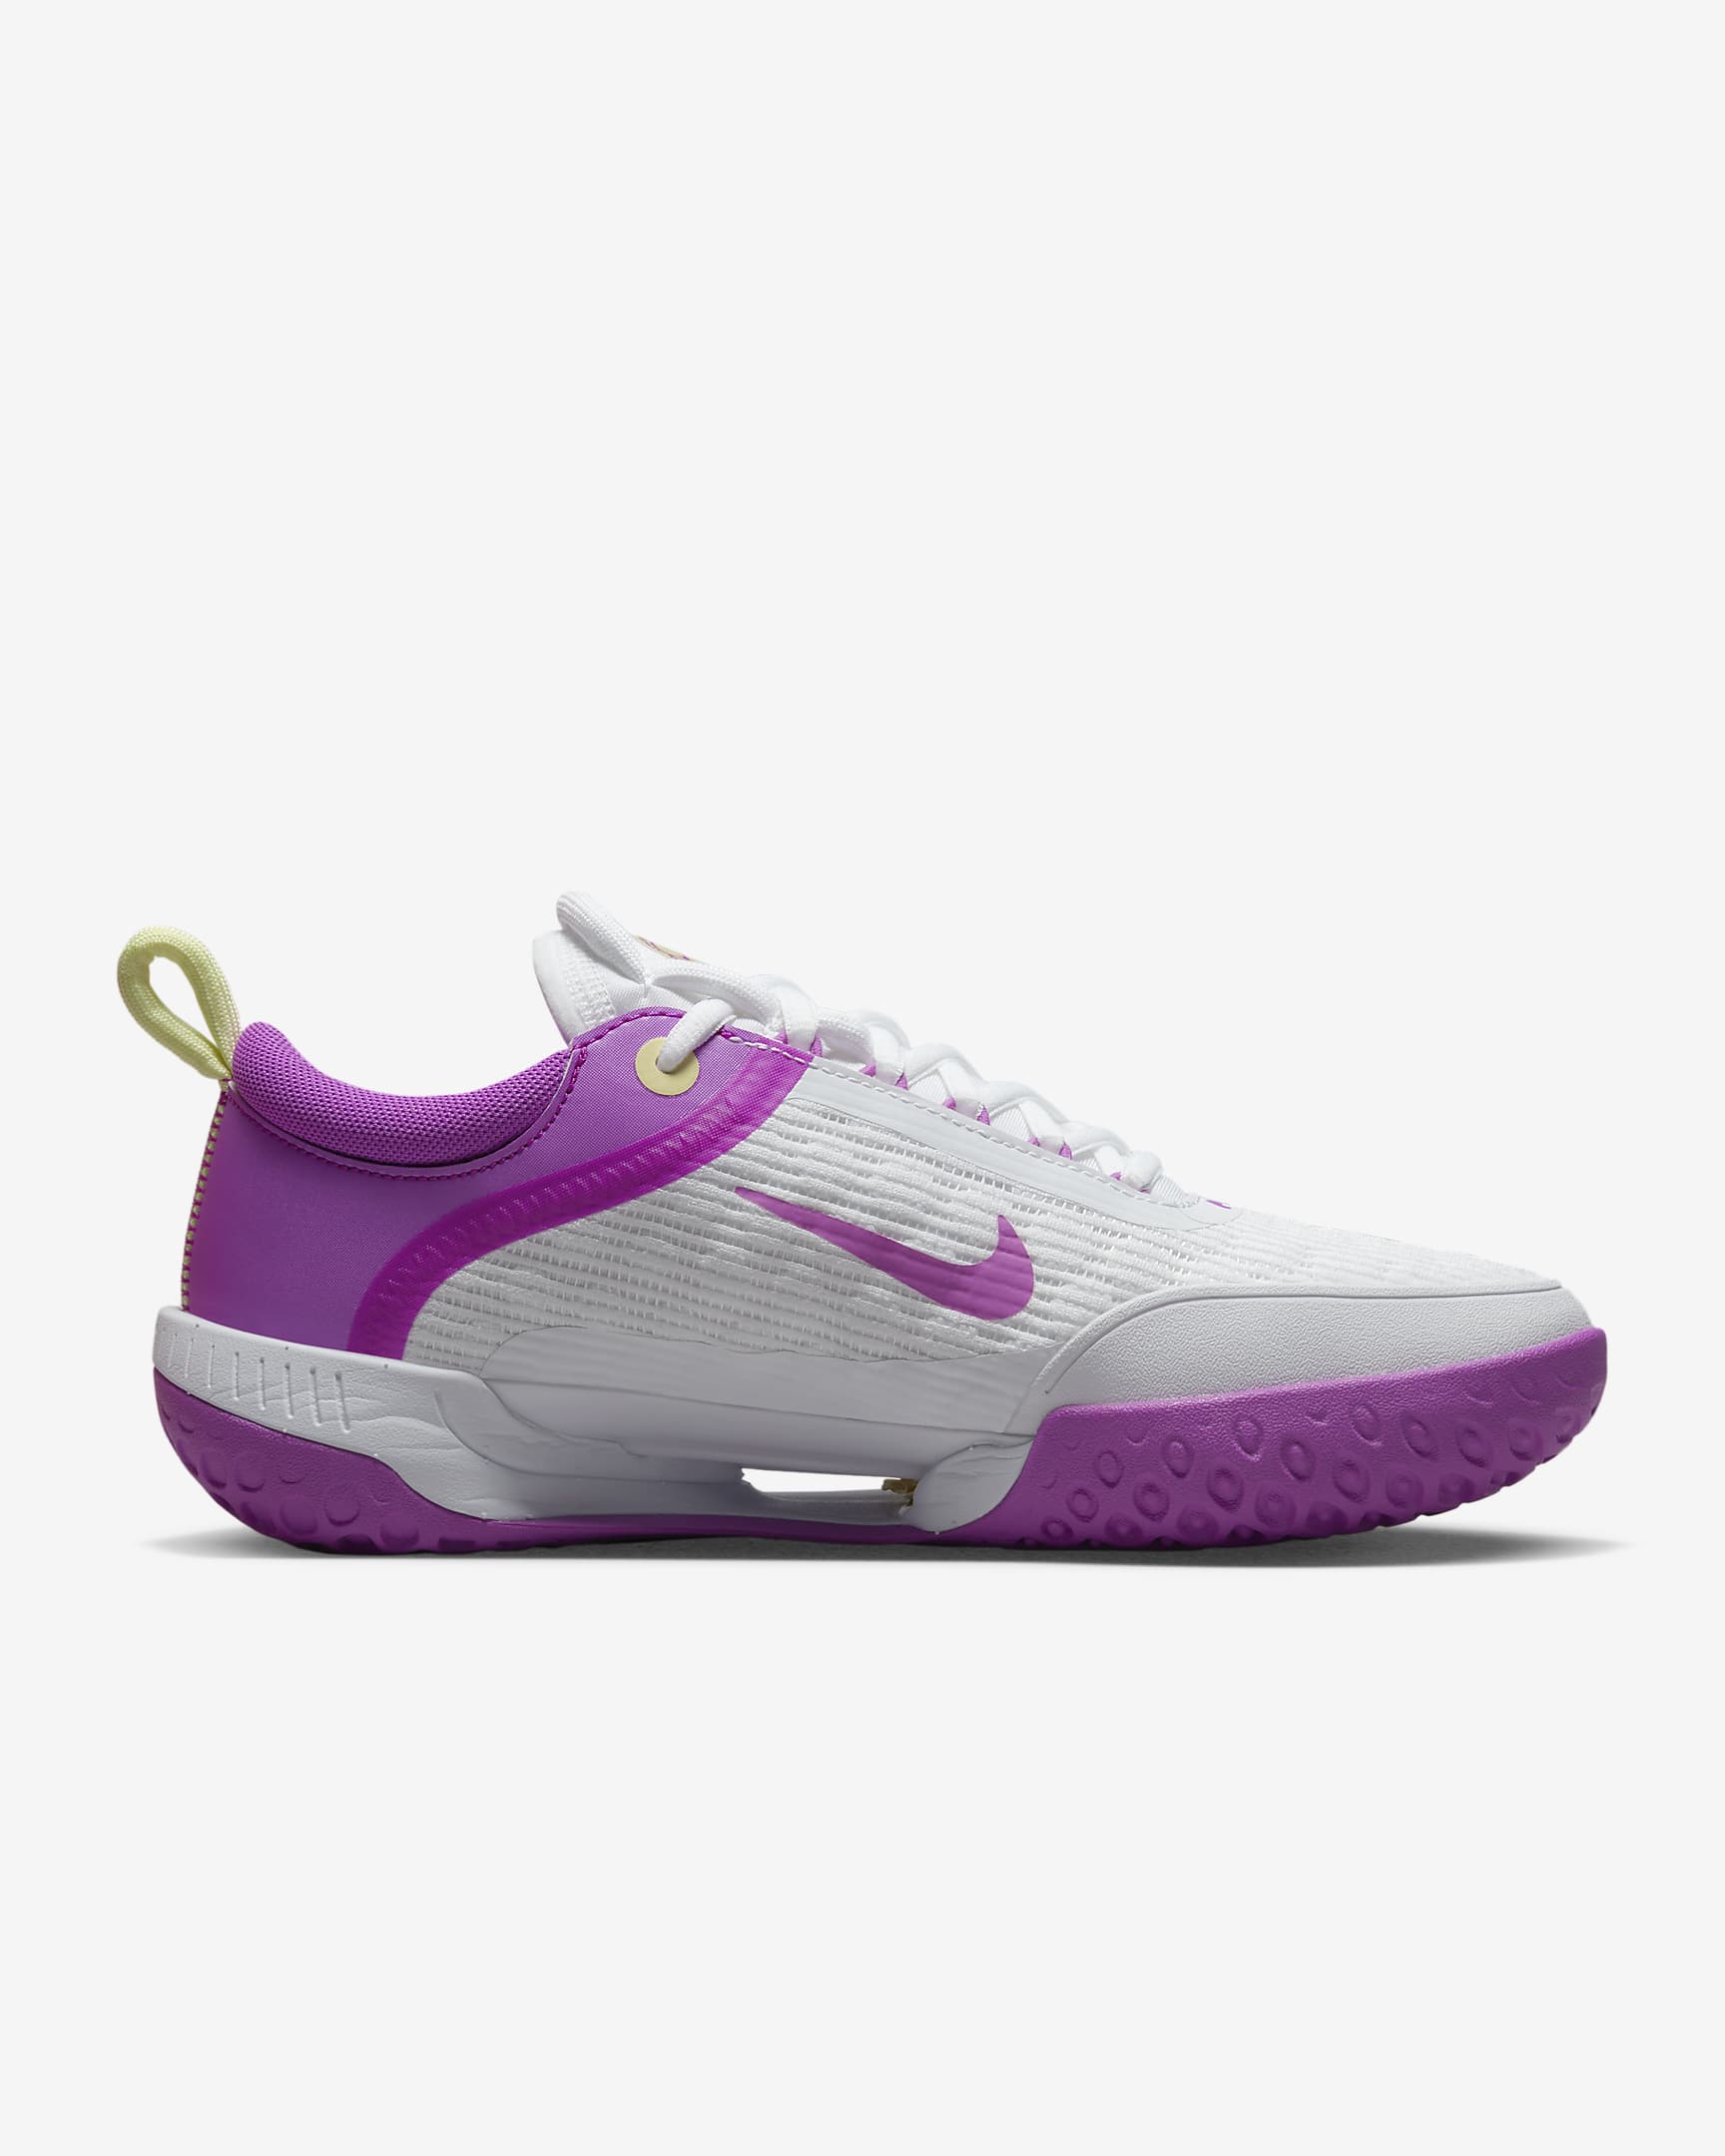 nikecourt-air-zoom-nxt-hard-court-tennis-shoes-0pFSks.png